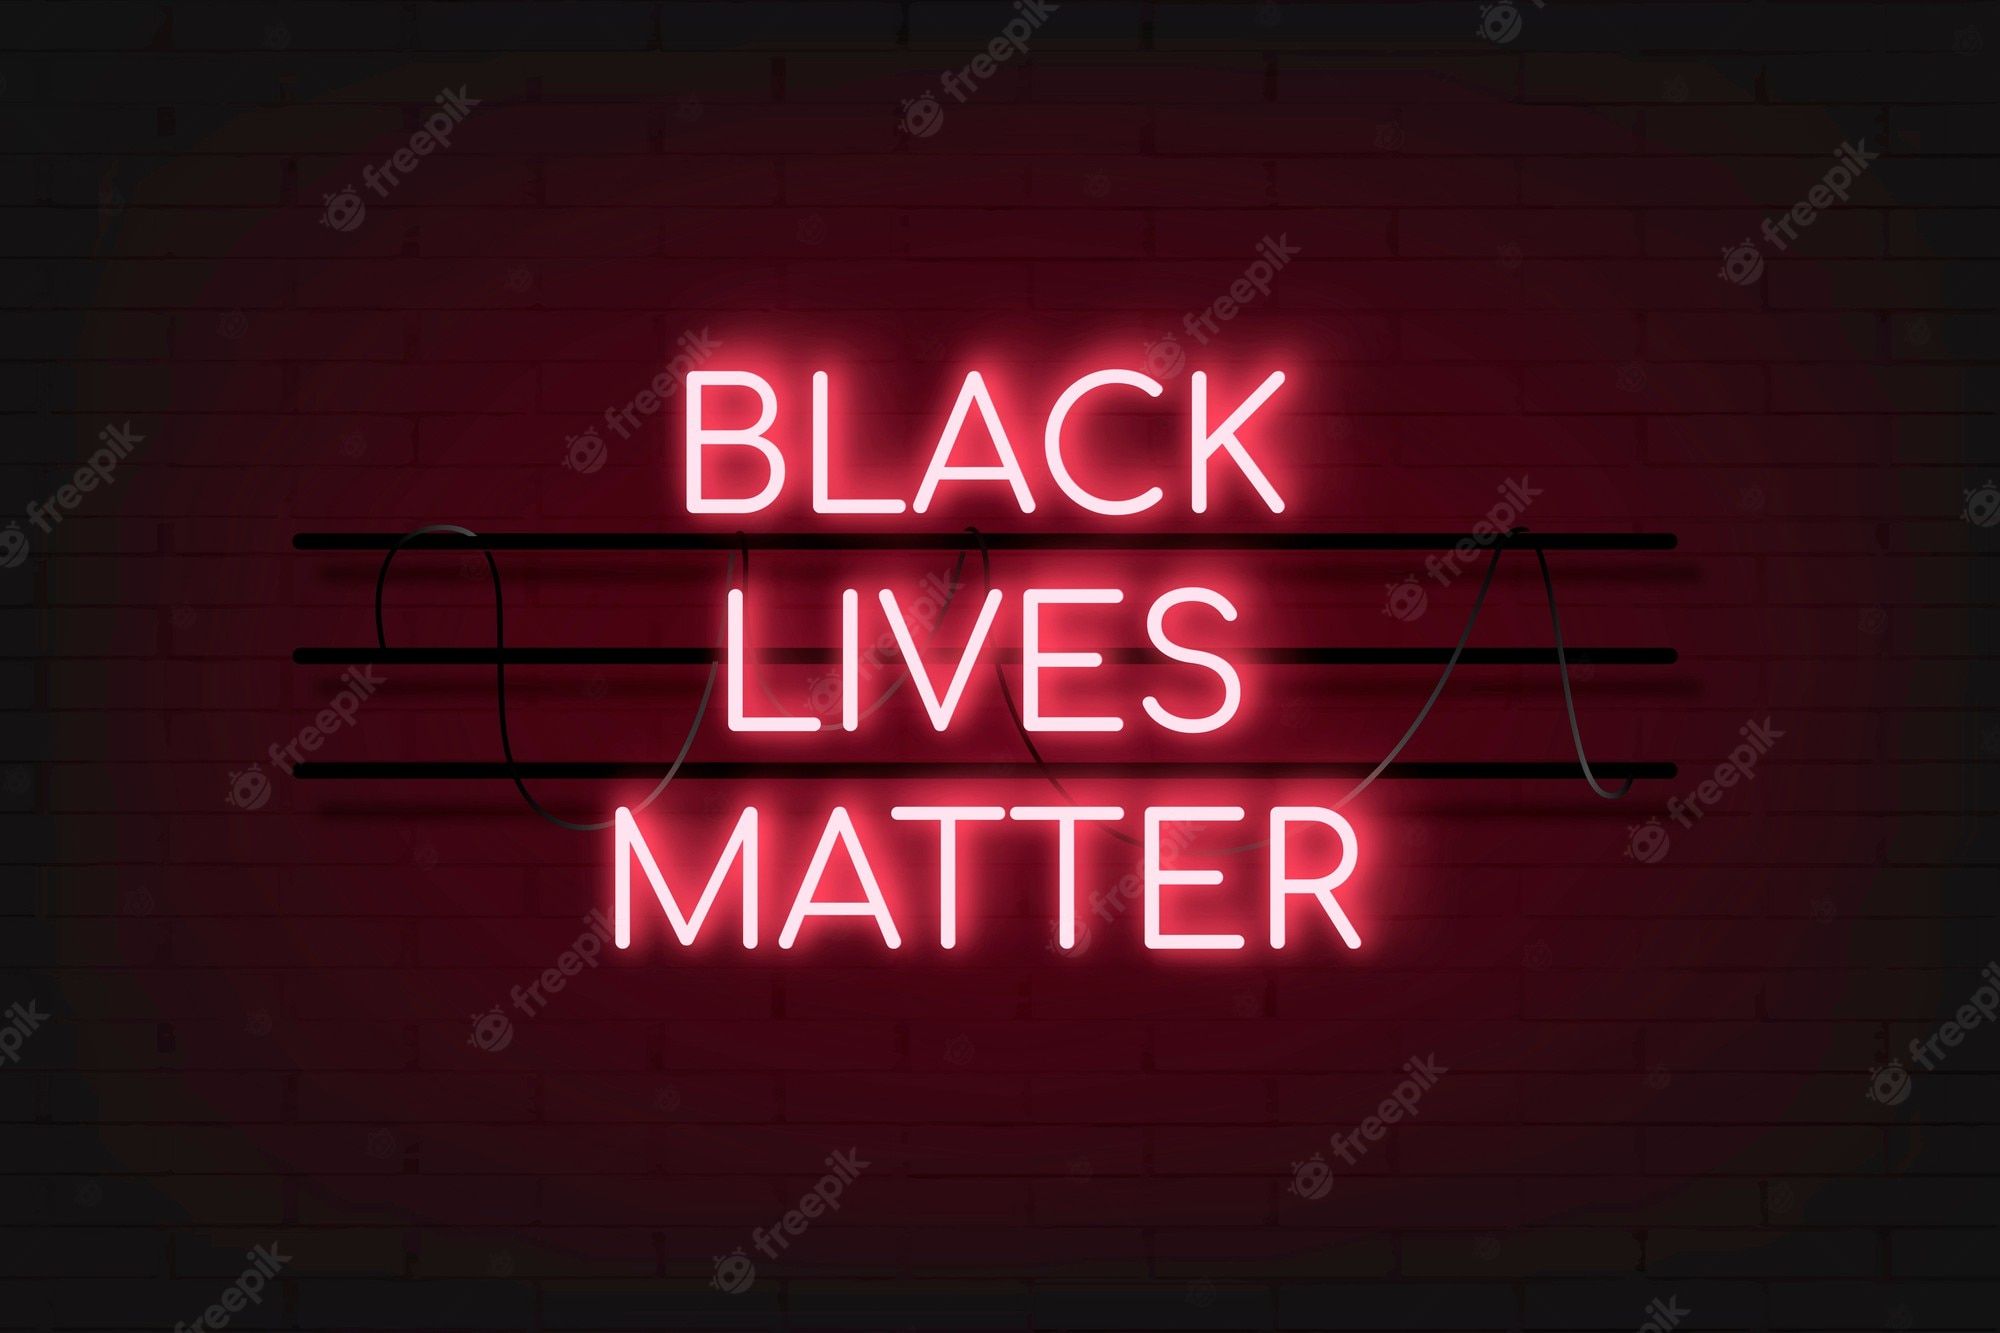 Black lives matter neon sign on a brick wall - Neon red